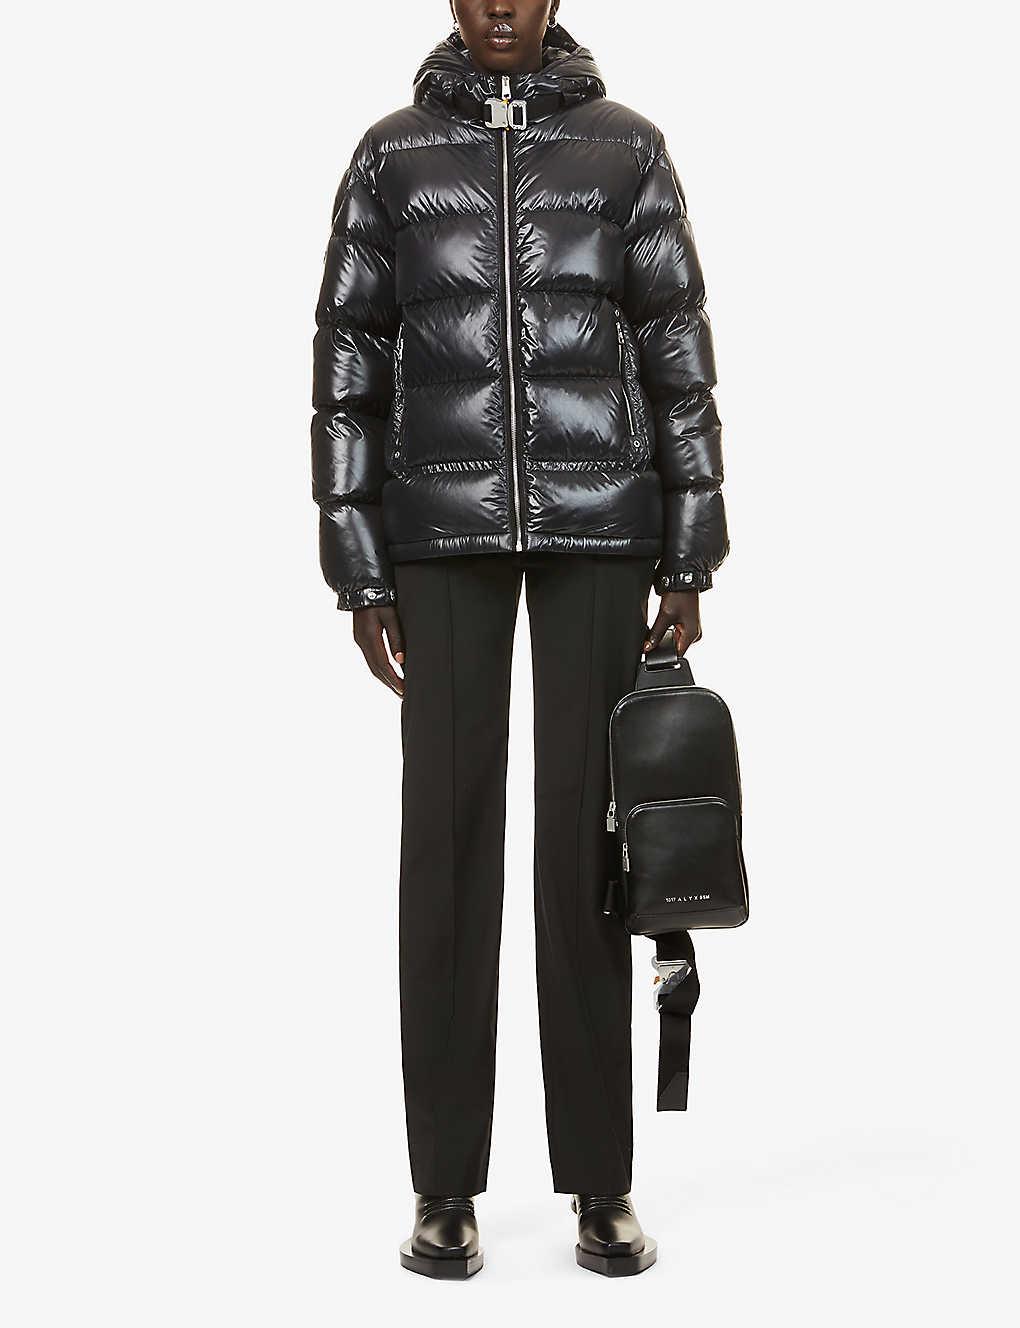 Moncler Genius X 1017 Alyx 9sm Shell-down Jacket in Black - Lyst